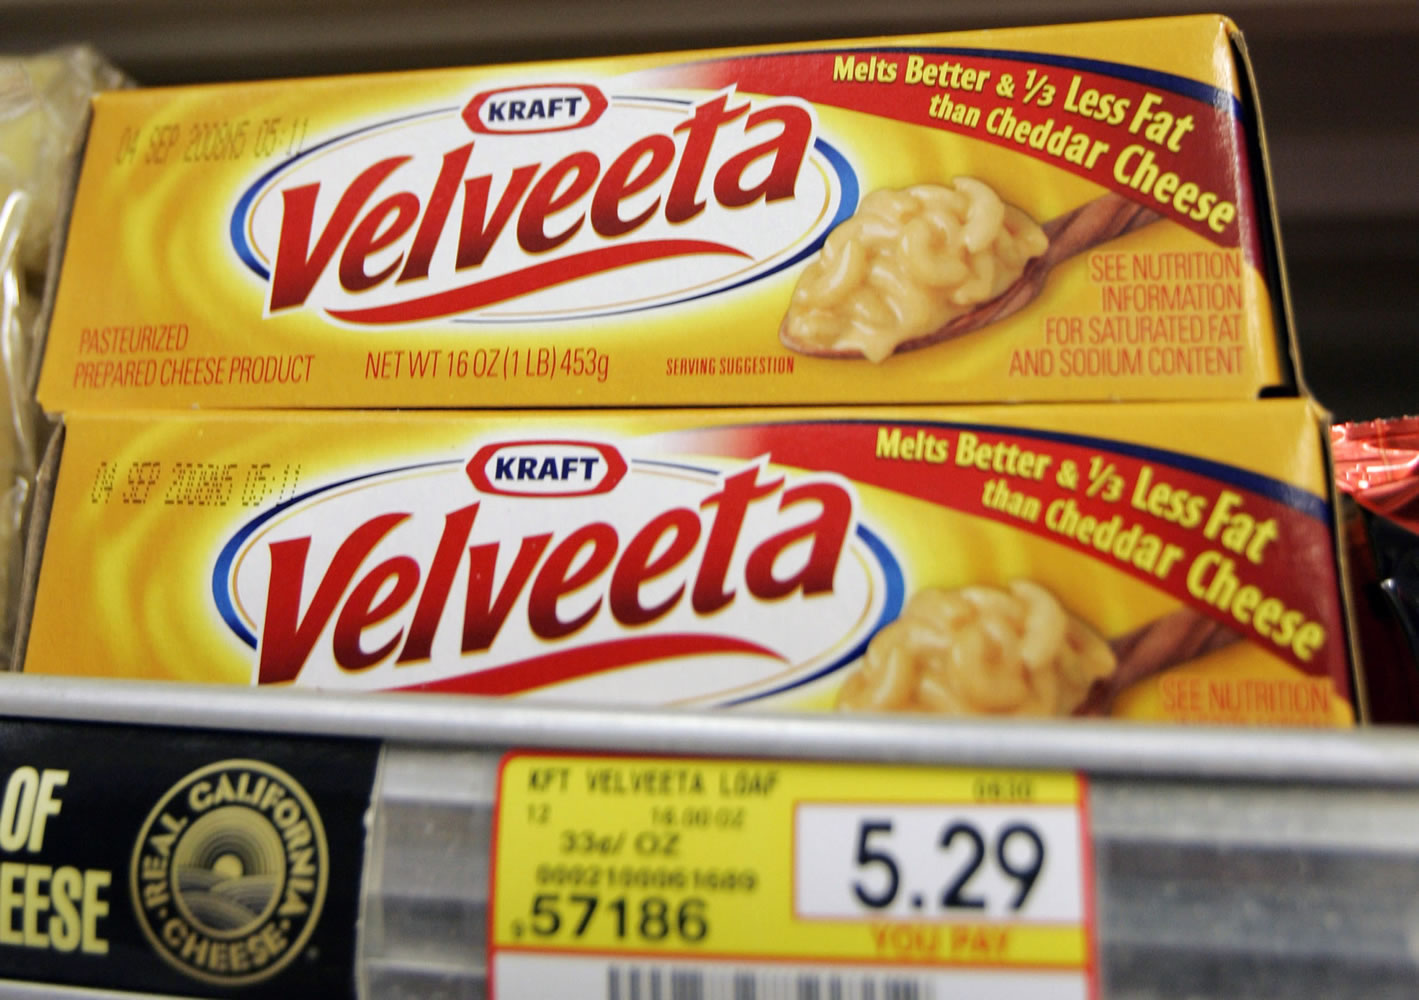 Kraft Foods said Tuesday that some customers may not be able to find Velveeta products over the next few weeks but didn't give any reasons for the apparent shortage.